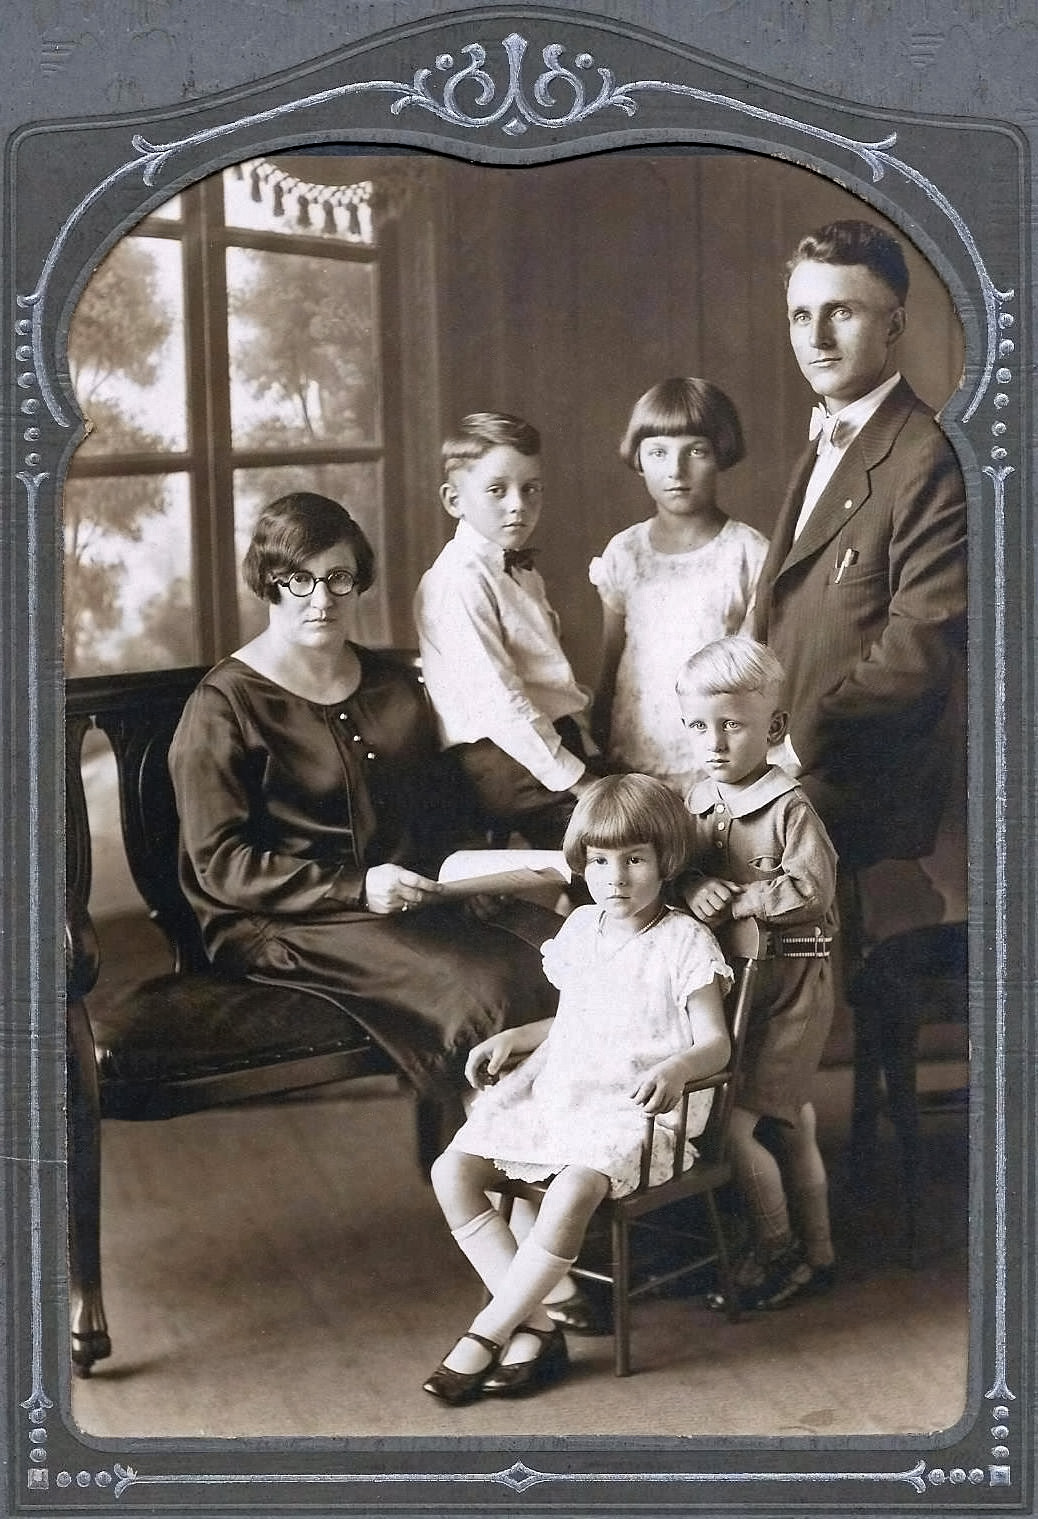 Portrait of my father's family taken in 1928 at Wautoma Wisconsin, not far from the family farm near Hancock. In front are my aunt Verona and uncle Bernold; behind them left to right are my grandmother Anna Rathjen Bohn, my father Gerhardt, my aunt Sylvia, and grandfather Herman Bohn. View full size.